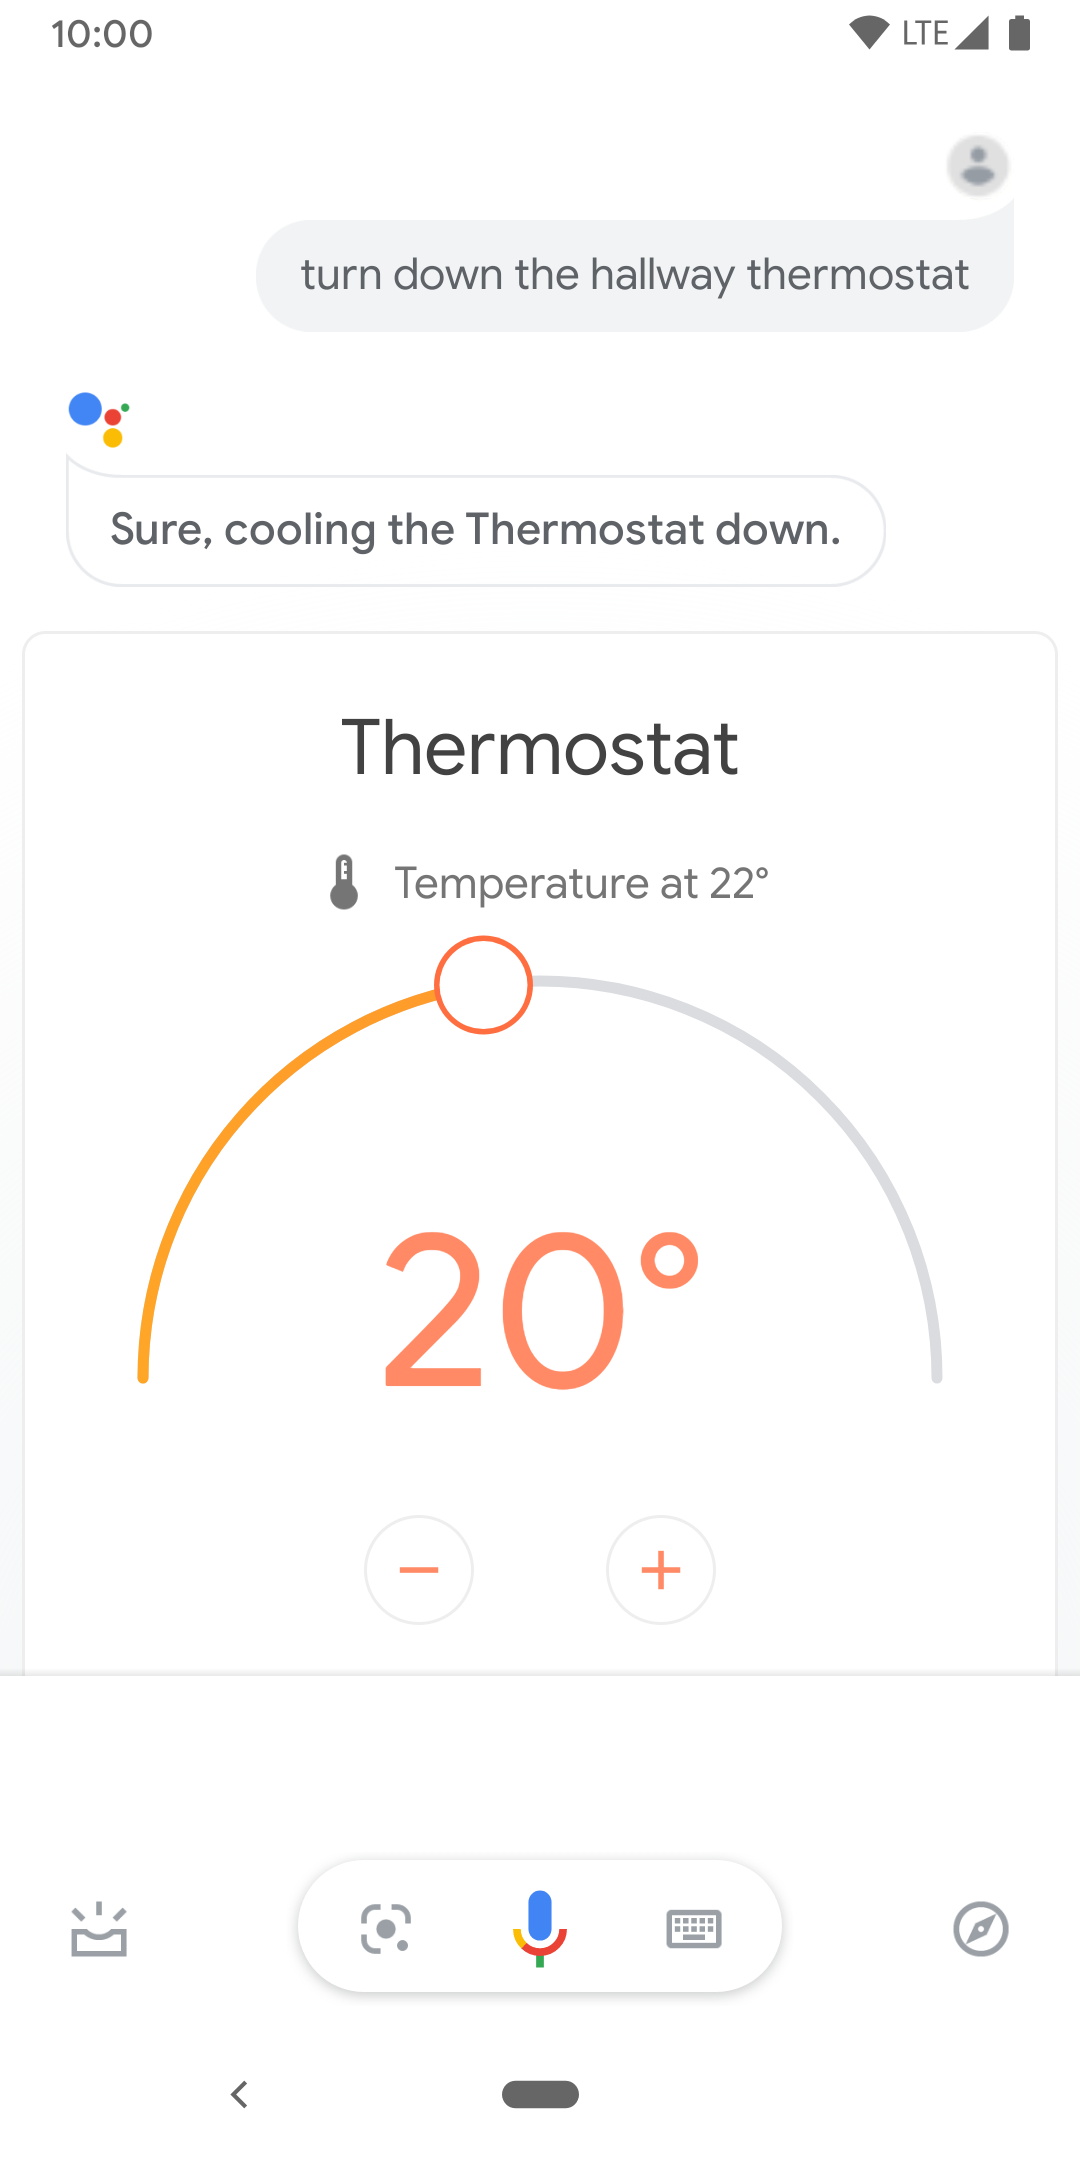 This image shows touch controls for controlling the temperature of
          the hallway thermostat.